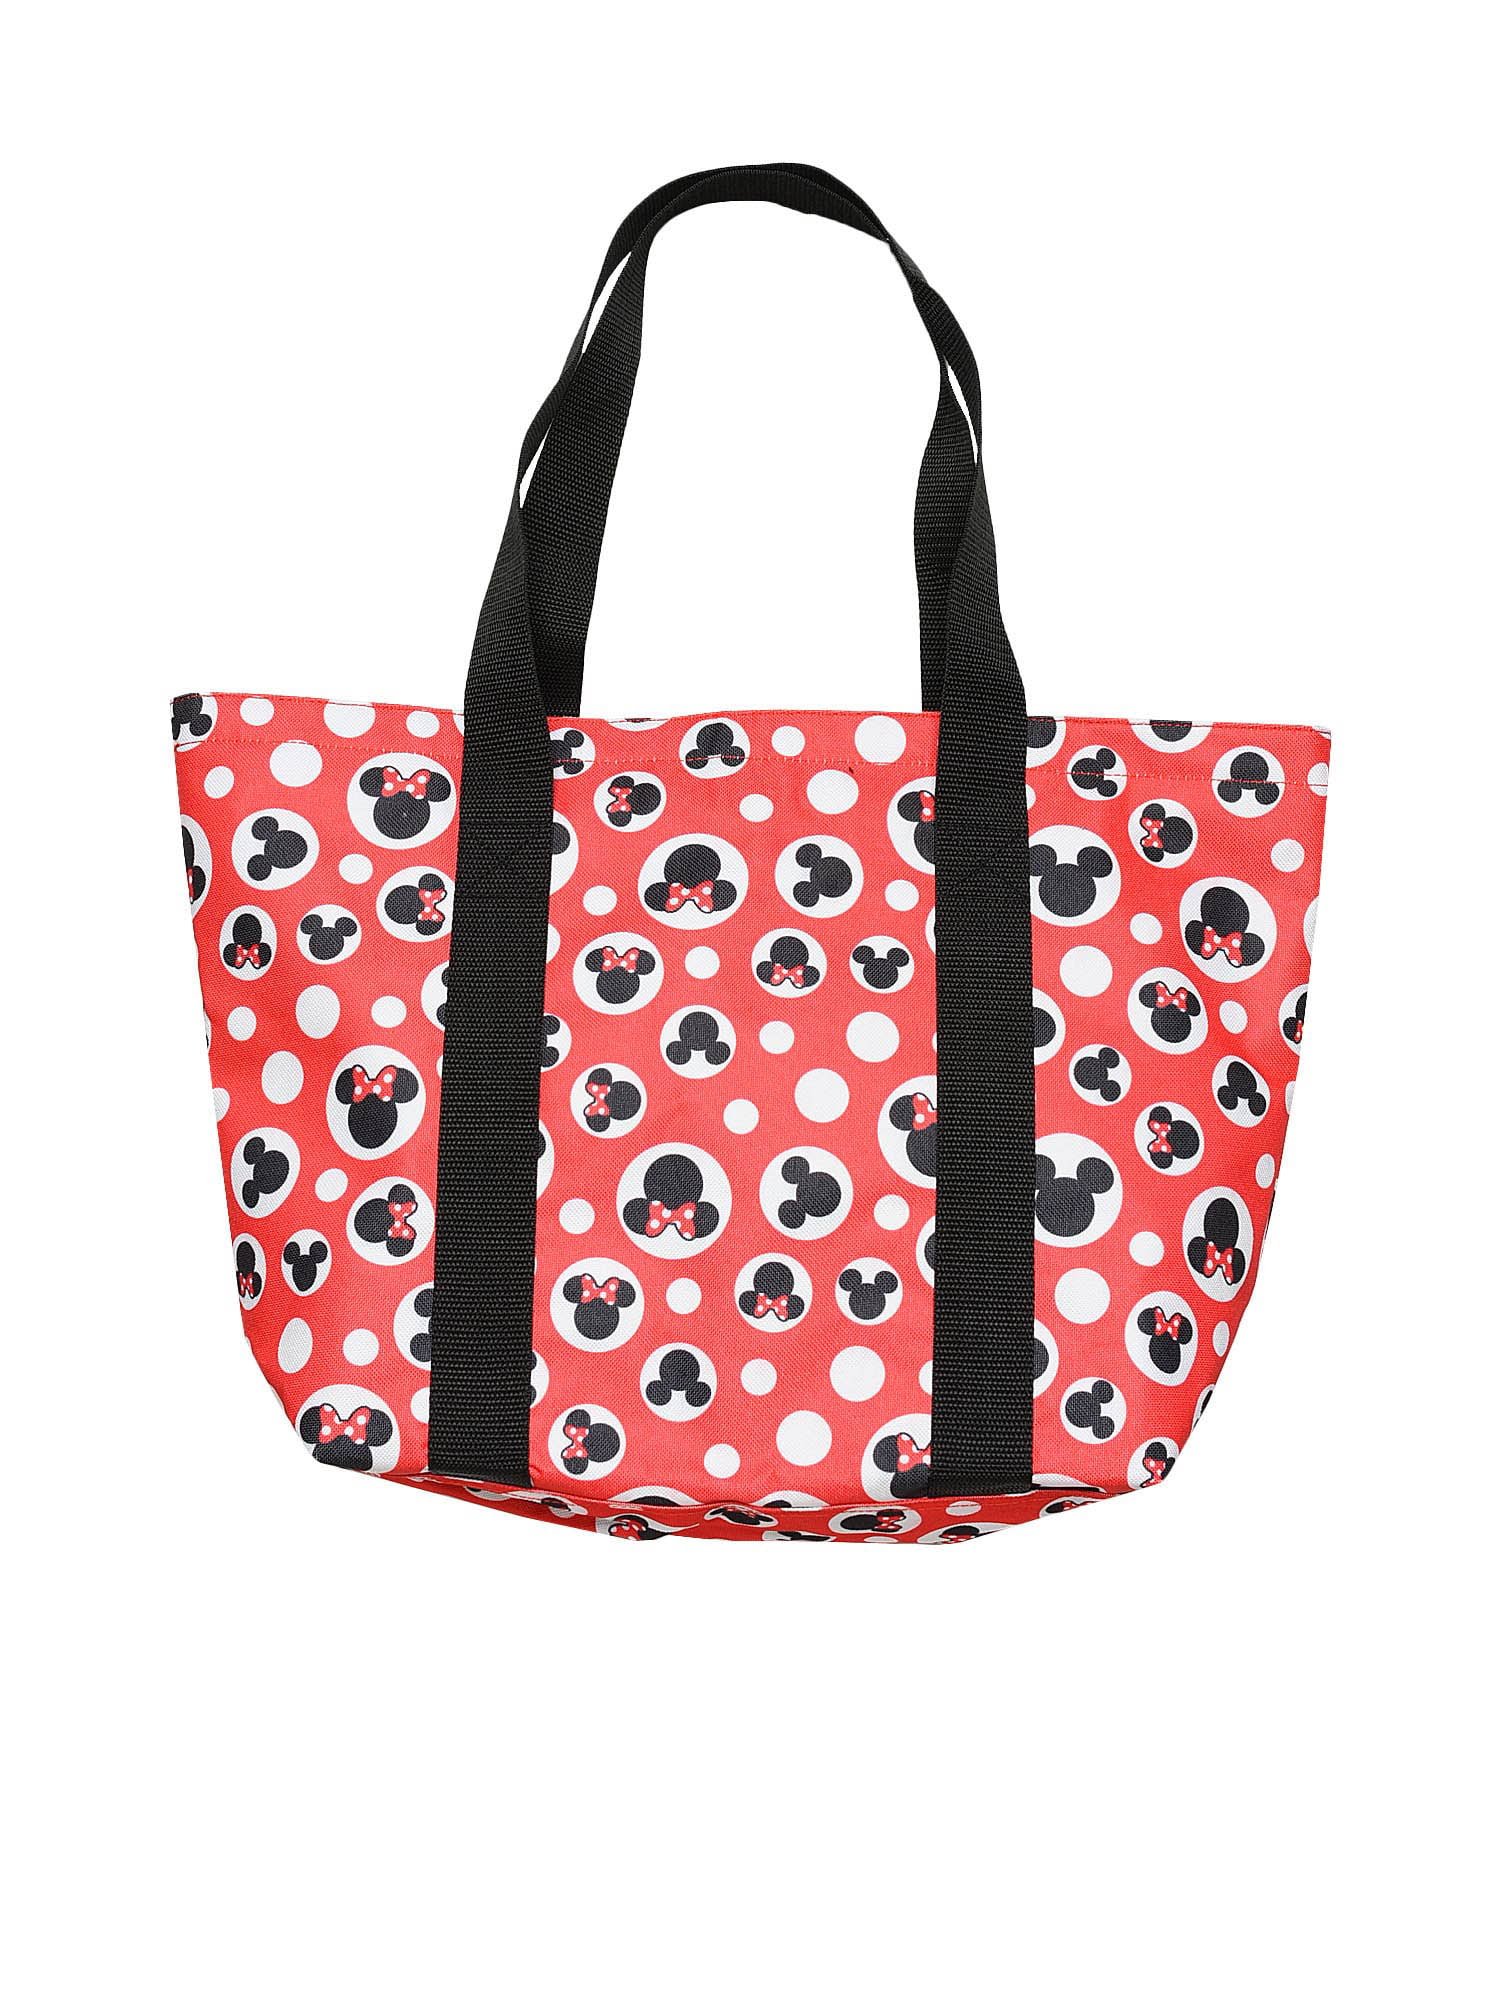 Disney Mickey & Minnie Mouse Zip Tote Bag Red Polka Dots (Women's)